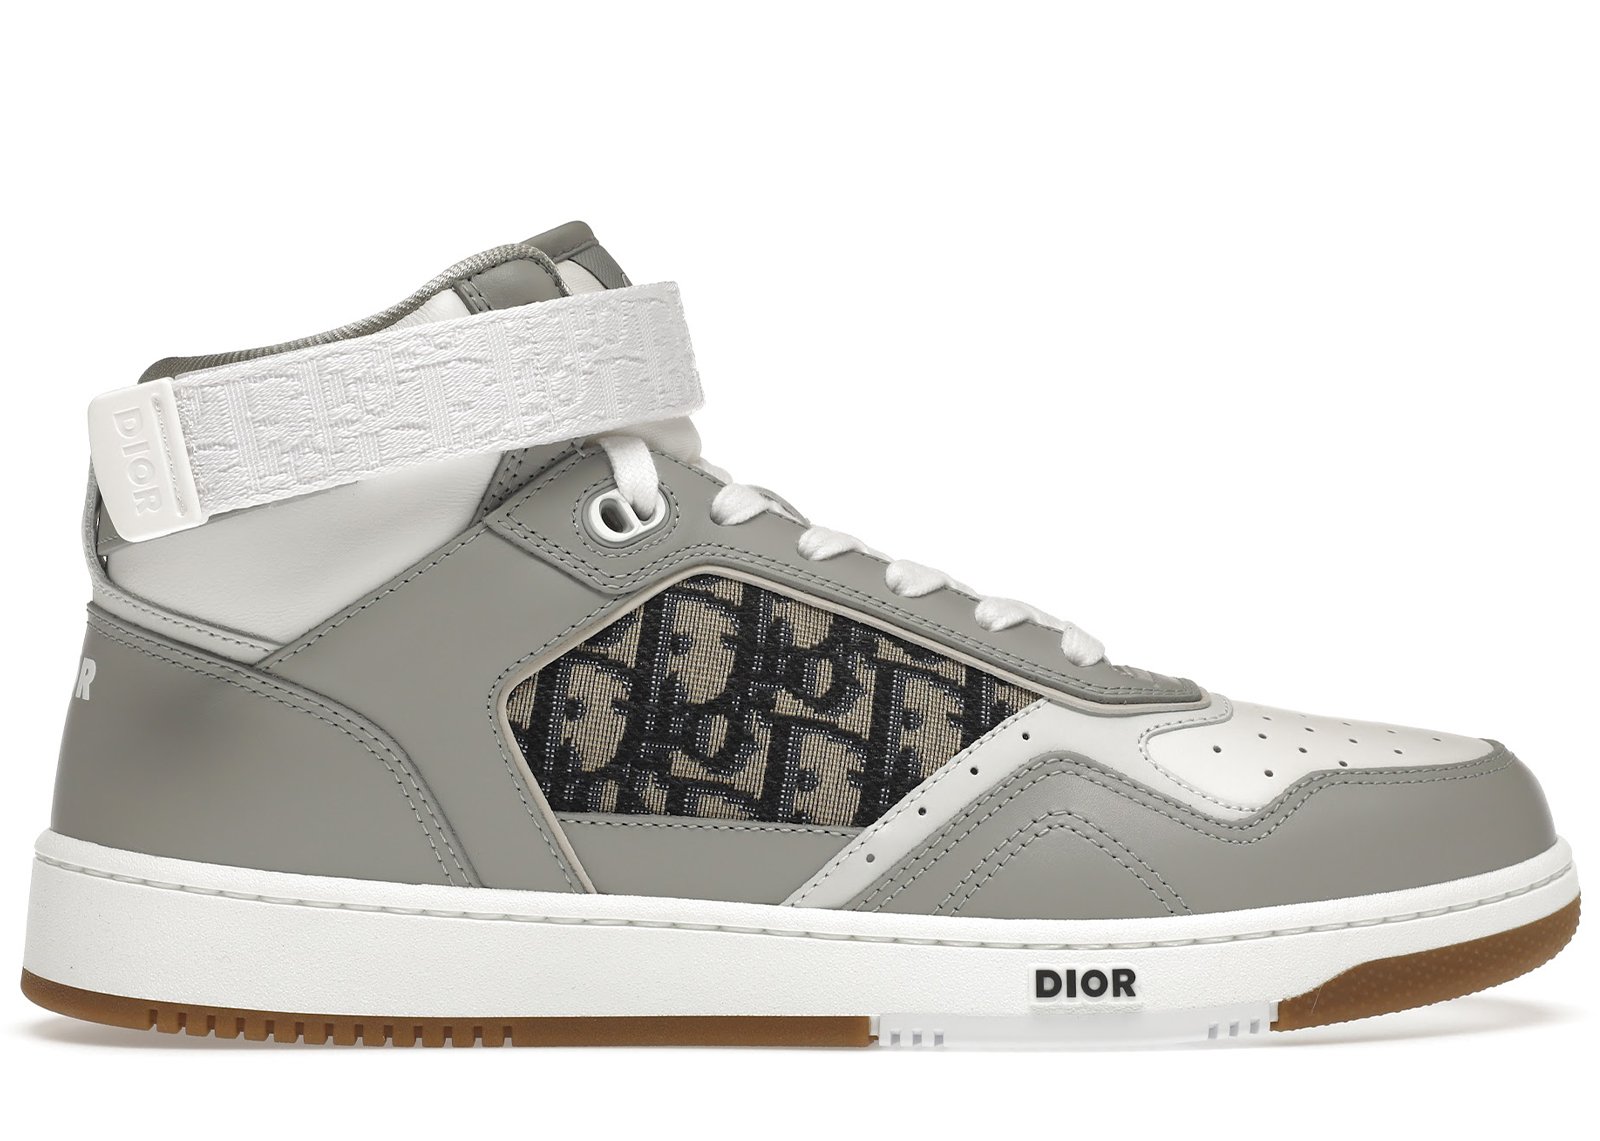 Dior B27 High Gray White sneakers